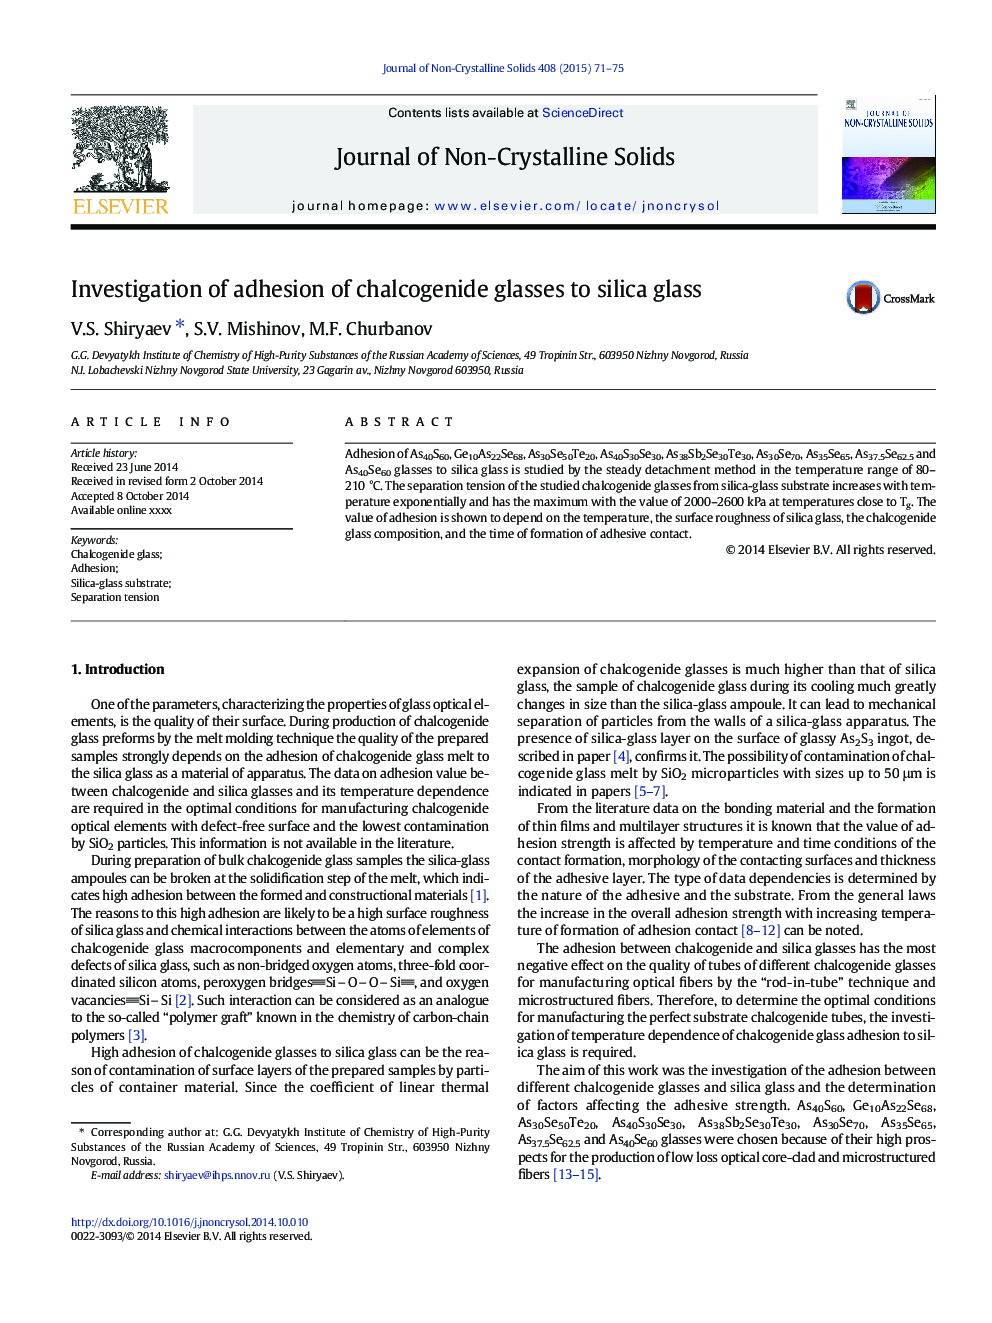 Investigation of adhesion of chalcogenide glasses to silica glass